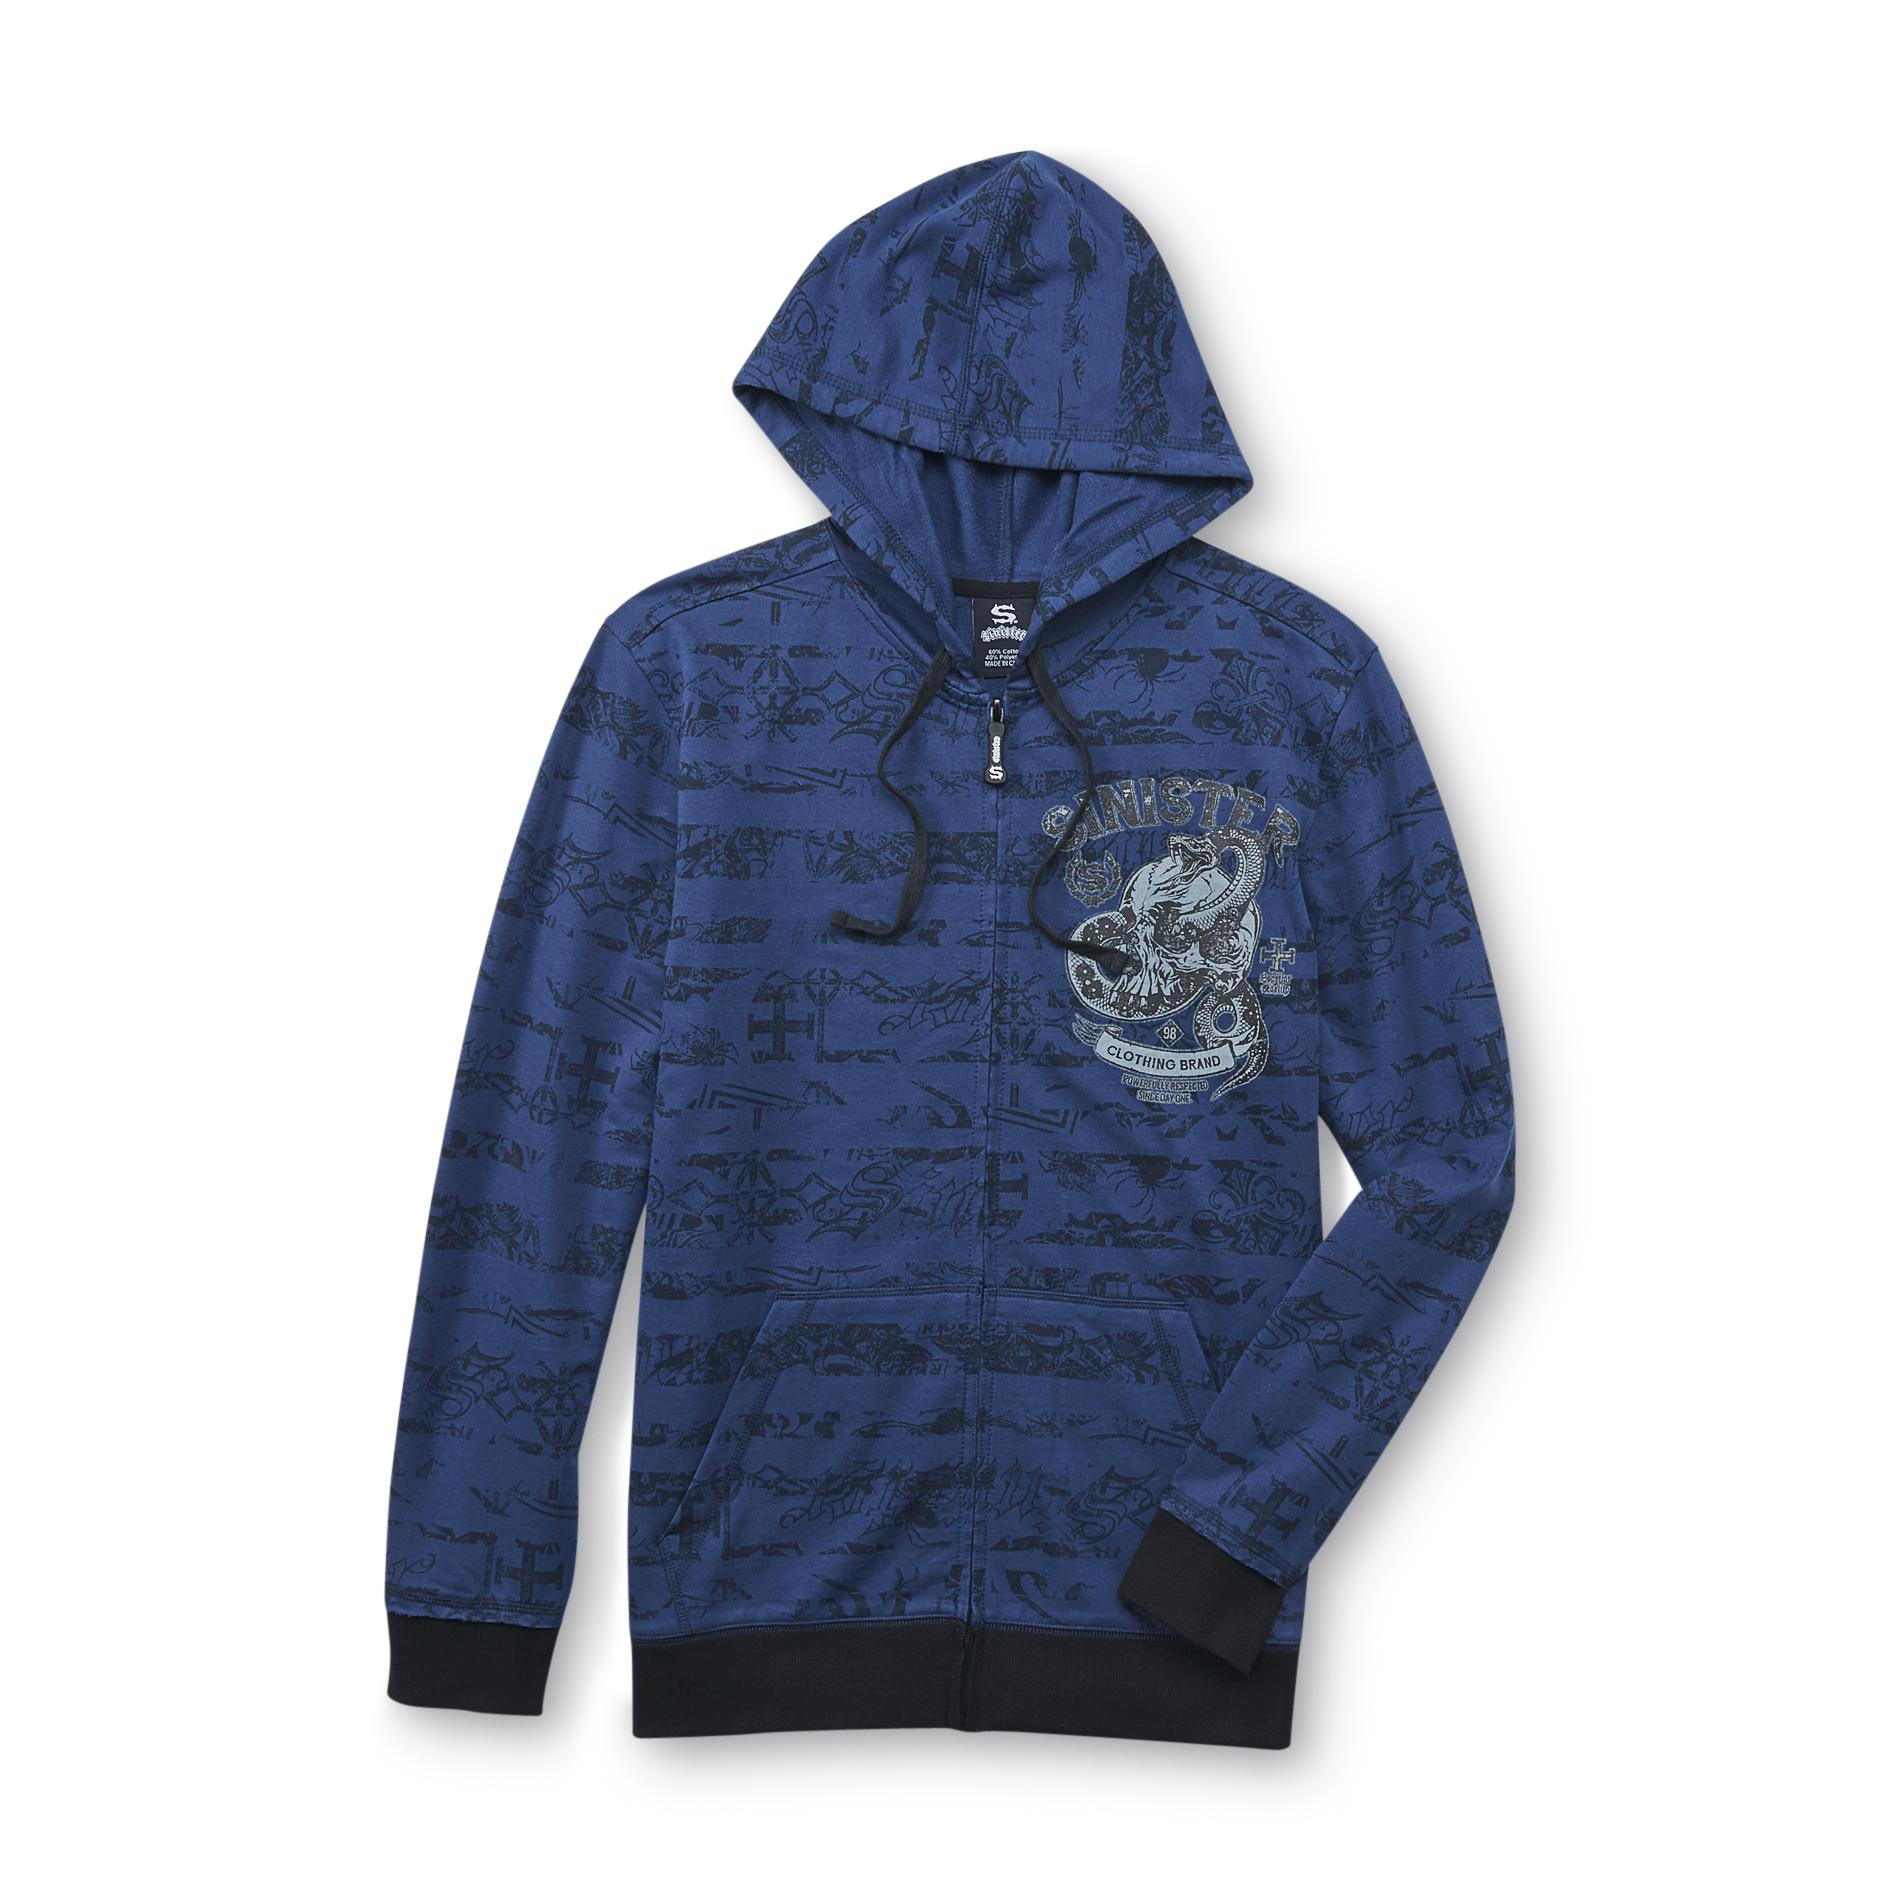 Sinister Men's Graphic Hoodie Jacket - Snakes